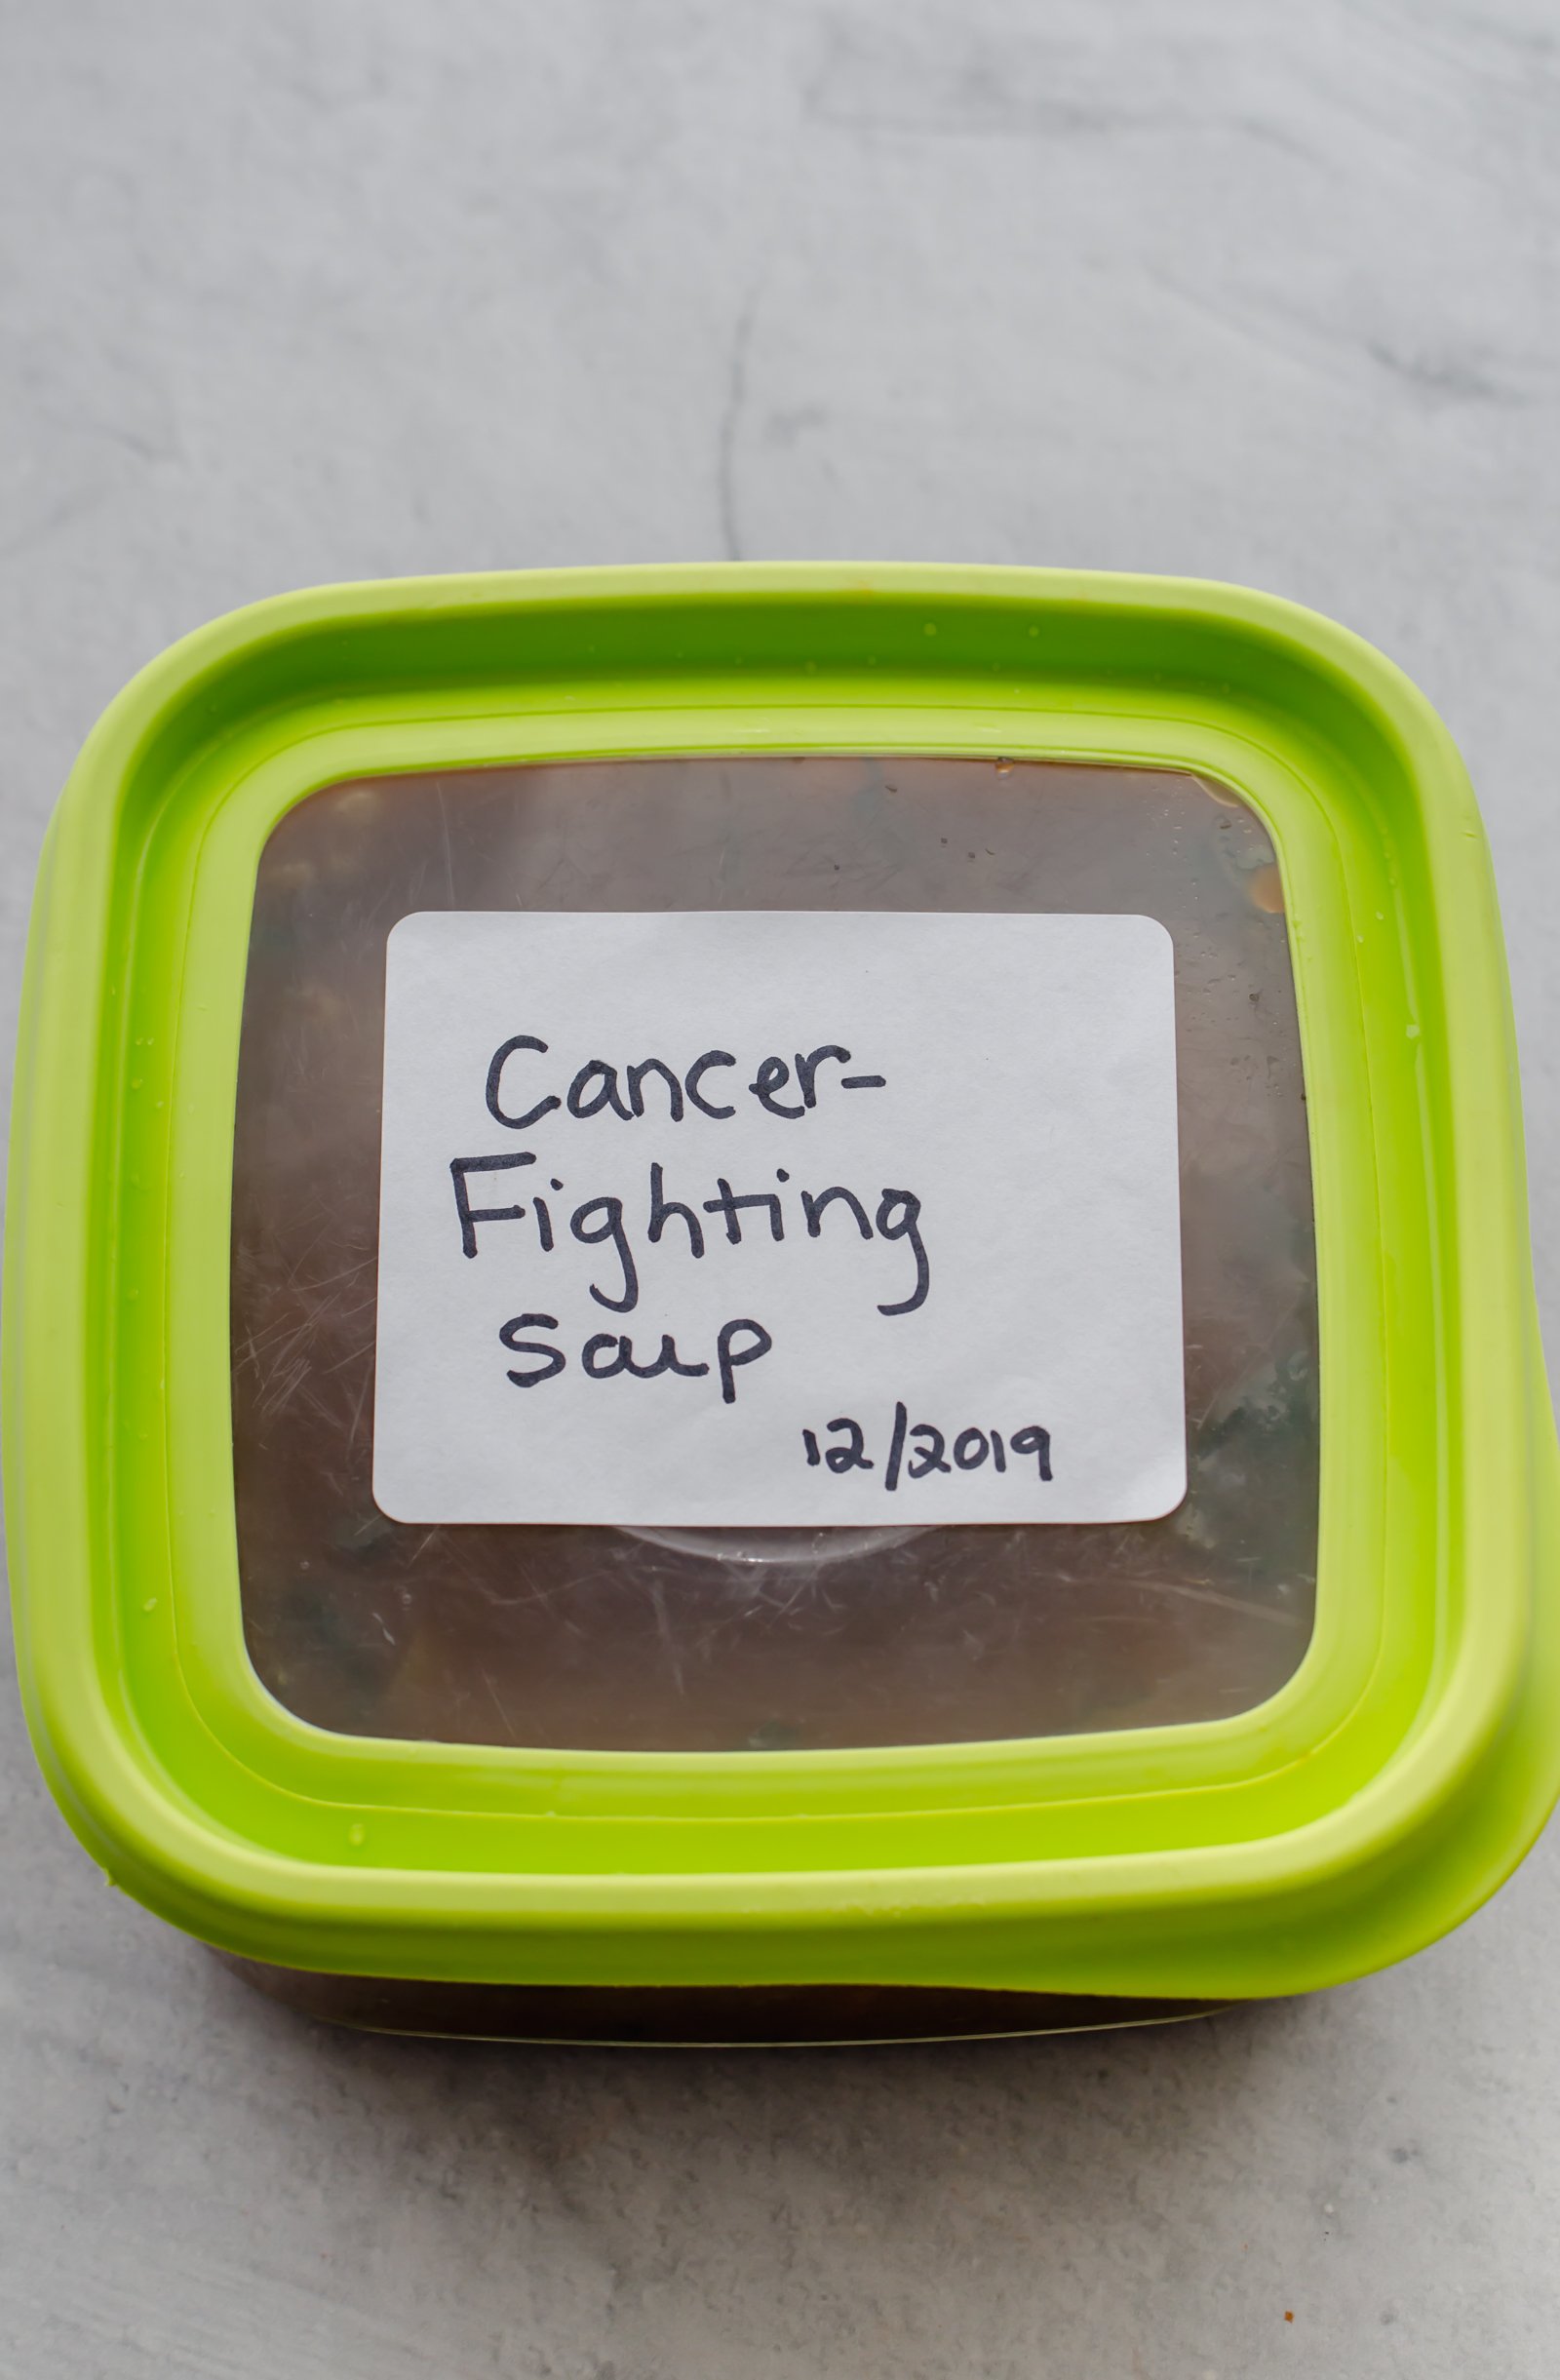 Full freezer container labeled Cancer Fighting Soup.